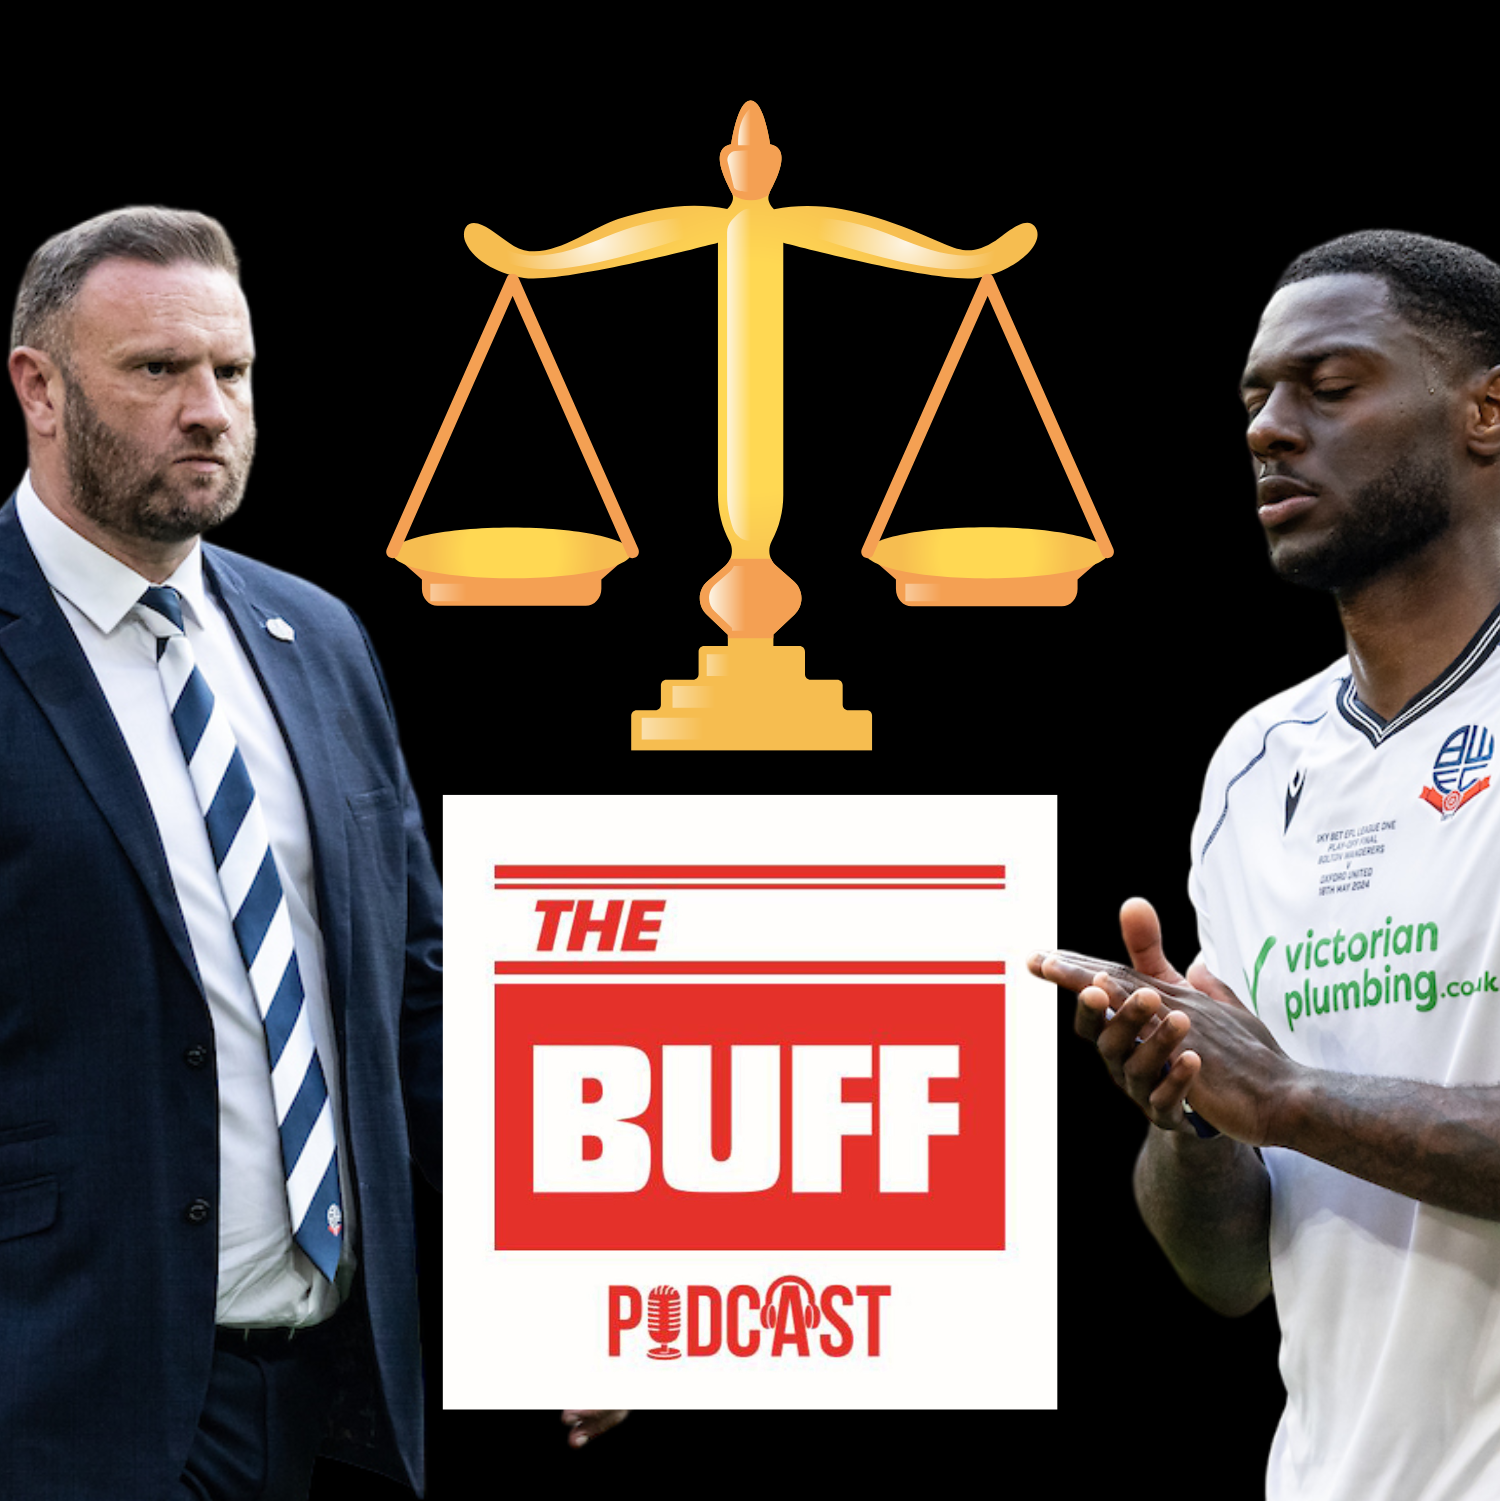 The Sad Buff Podcast: If you didn't laugh, you'd cry...